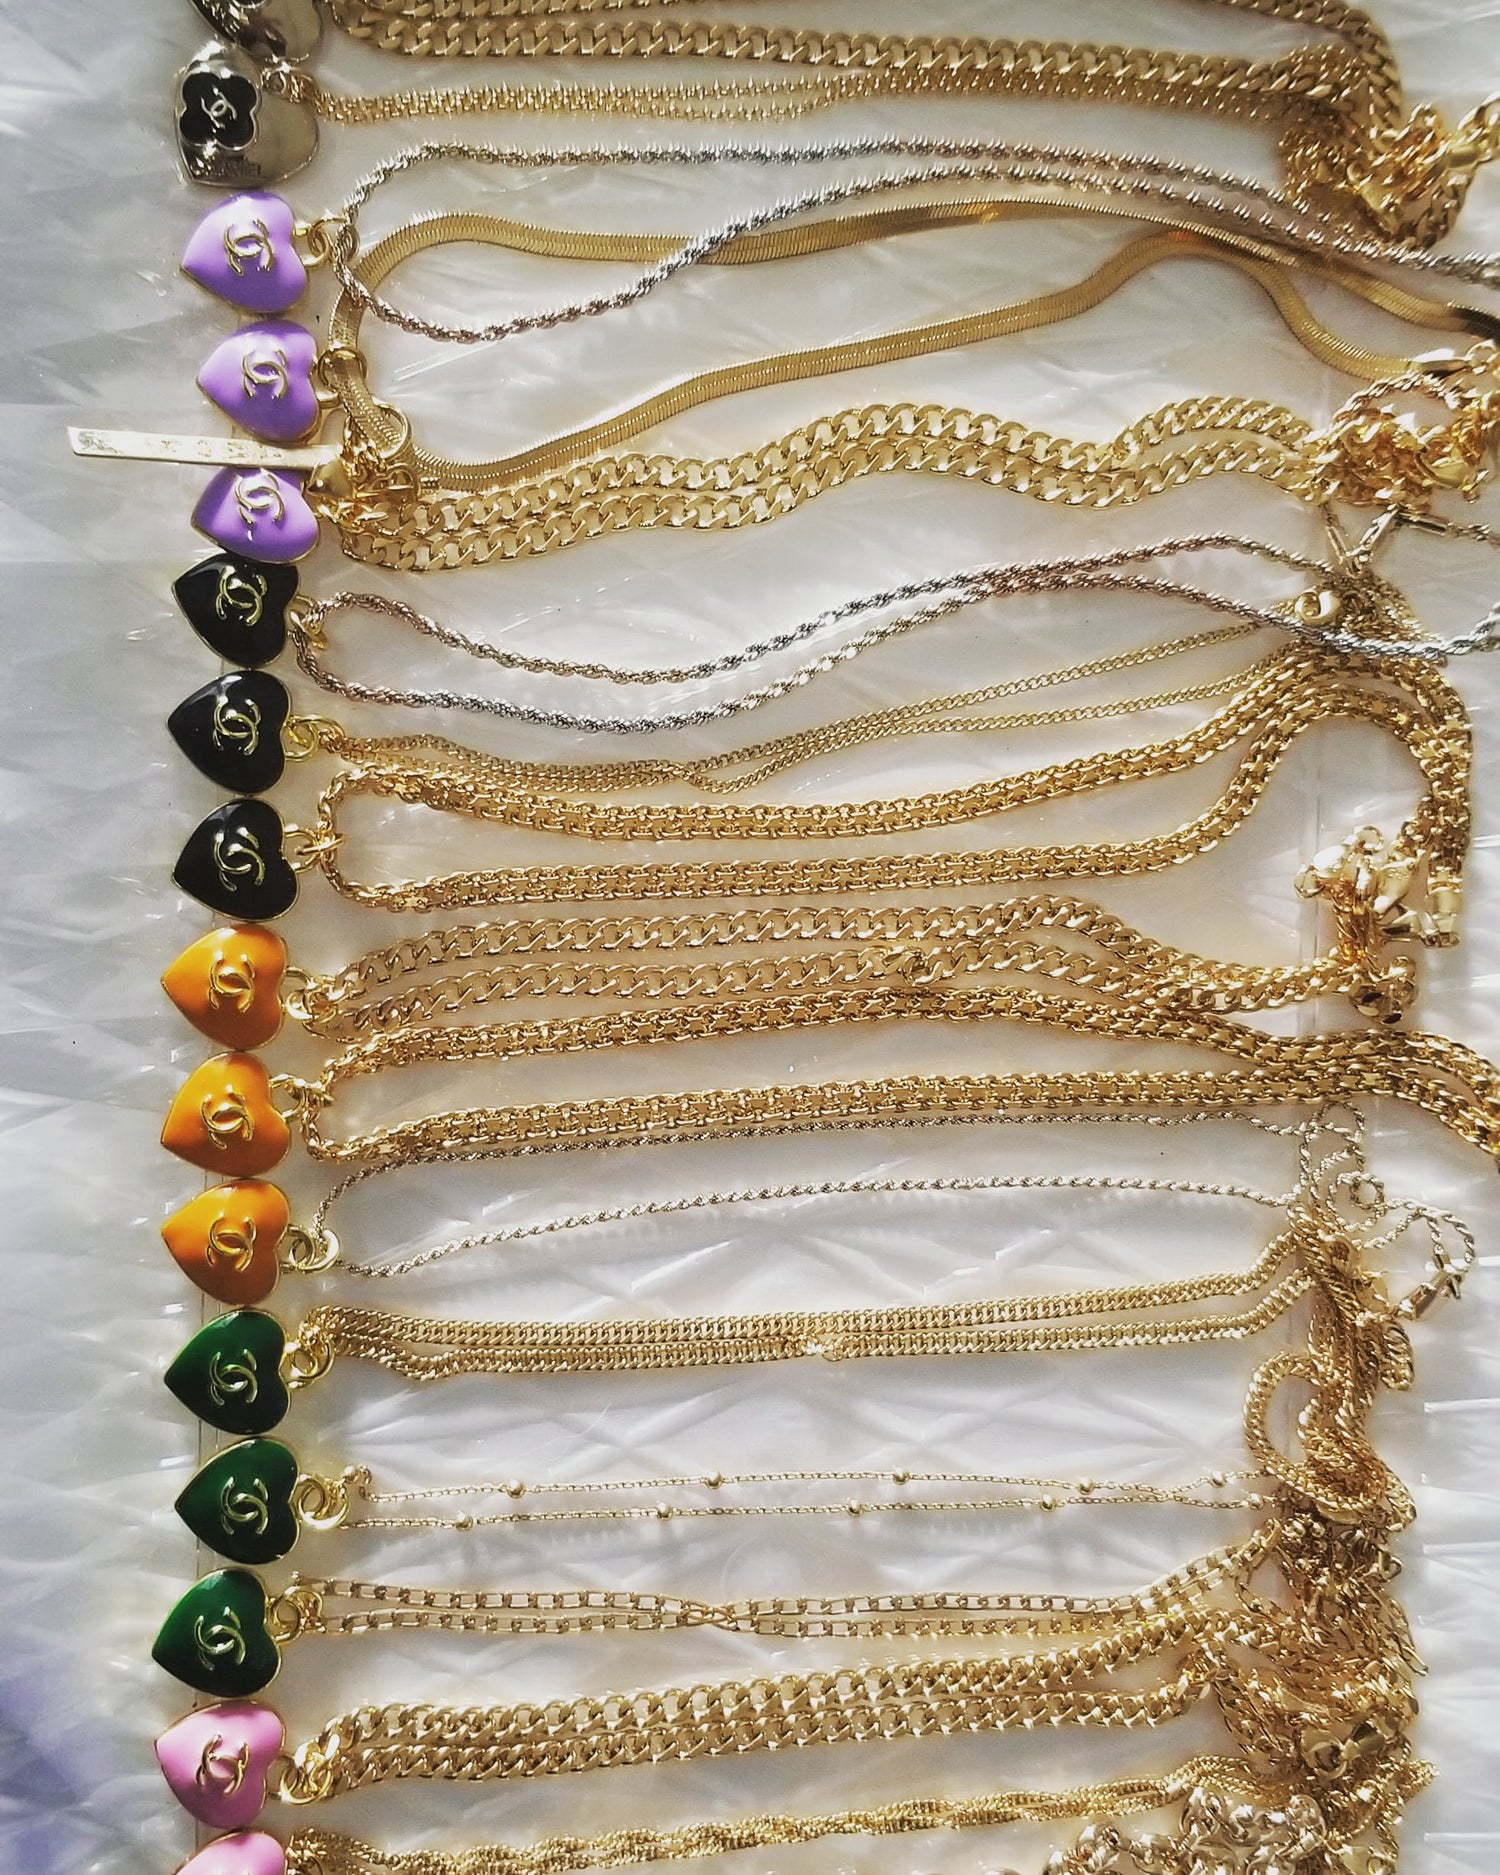 Repurposed Jewelry- All the colors of the rainbow!